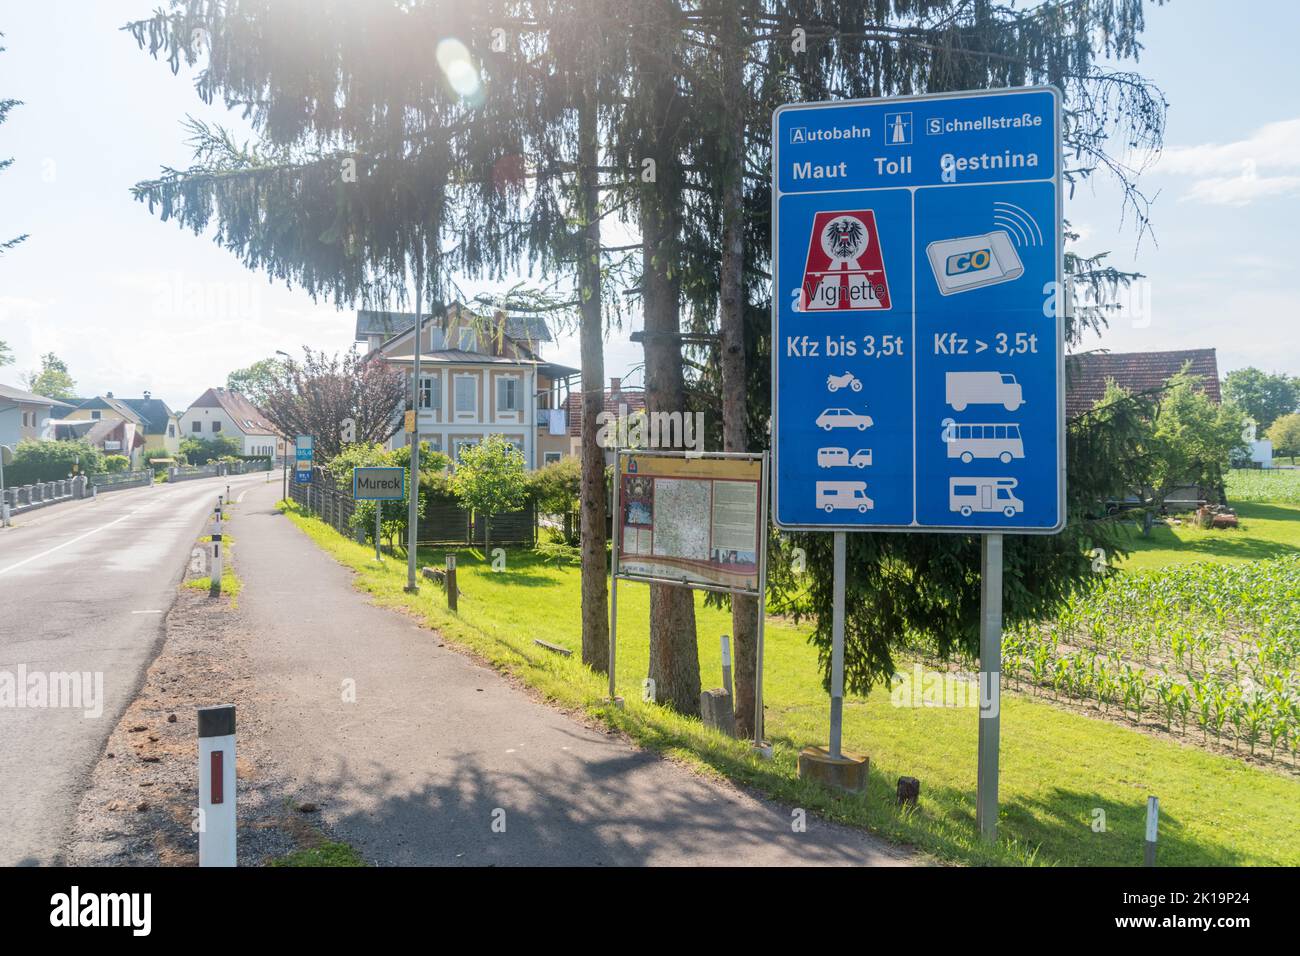 Mureck, Austria - June 1, 2022: Entrance road to Austria with board information about toll. Stock Photo